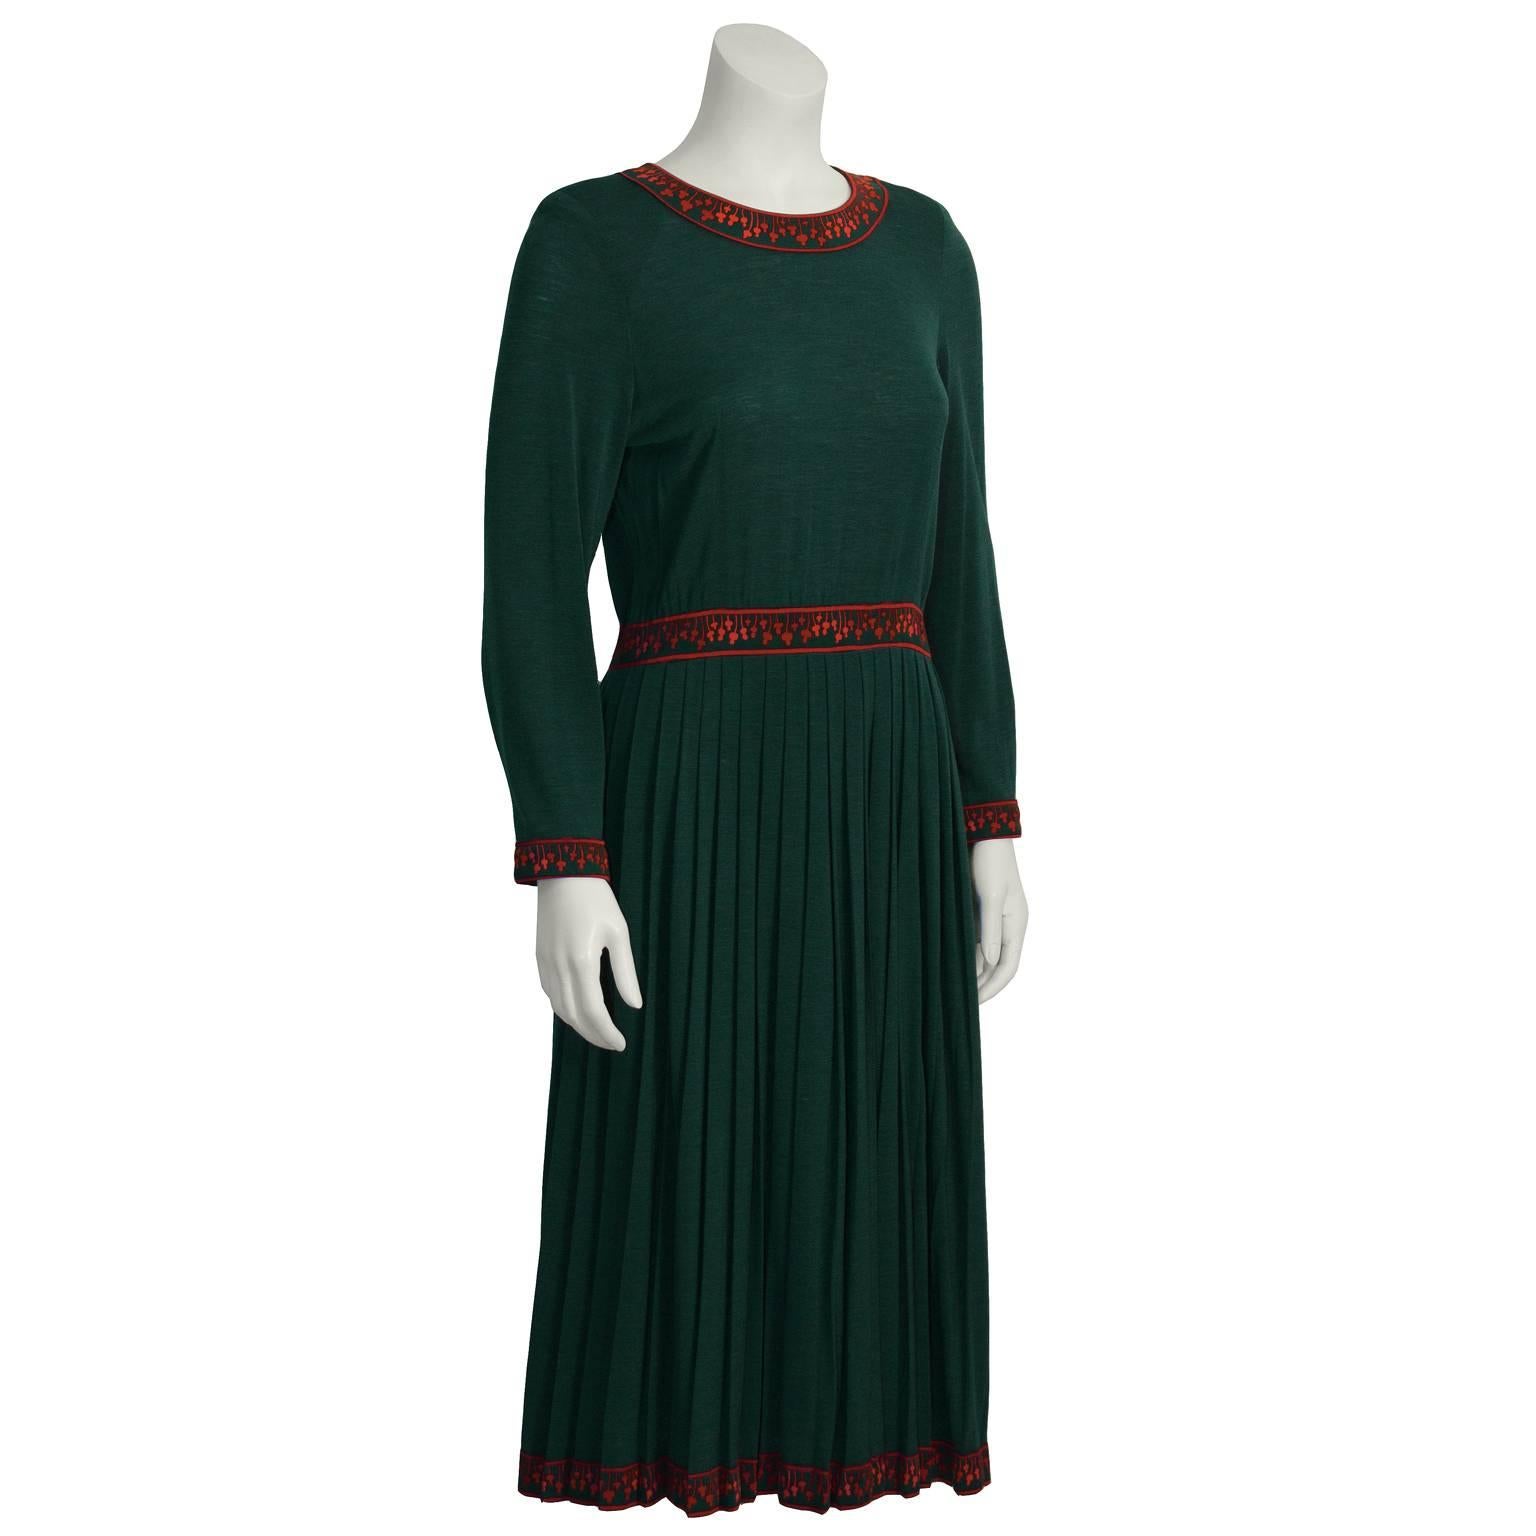 Adorable 1970's Alverado Bessi dress is a deep emerald green with a bright fushia floral design trim. Bessi was a contemporary of Emilio Pucci, best known for his printed graphic fabrics. Long sleeved knitted jersey fabric with a fitted waist, a